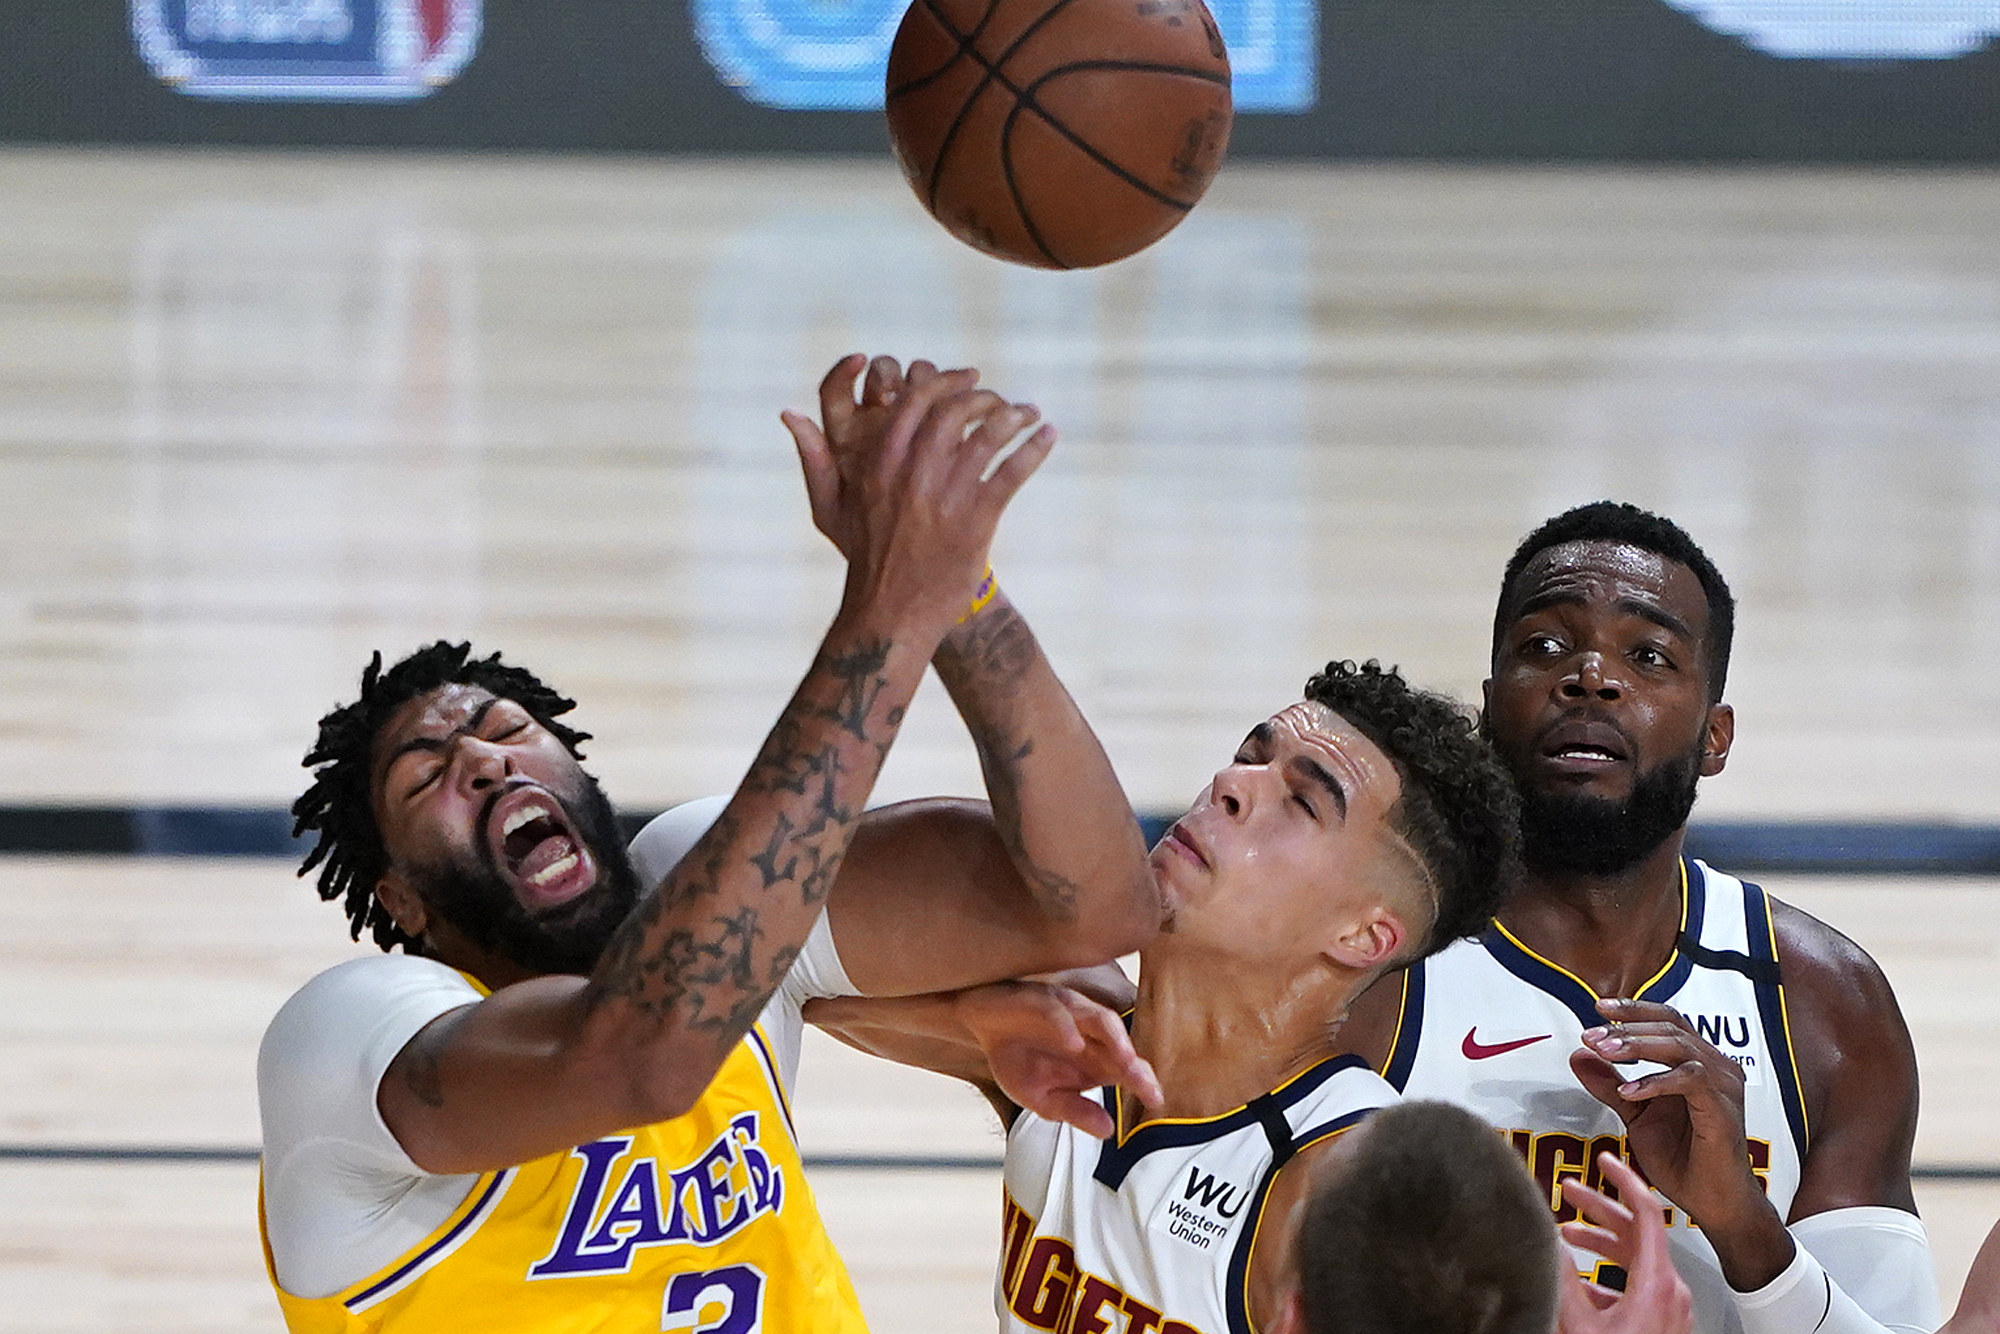 Los Angeles Lakers' Anthony Davis, left, battles Denver Nuggets' Michael Porter Jr. during the first half of an NBA basketball game Monday, Aug. 10, 2020, in Lake Buena Vista, Fla. at AdventHealth Arena.